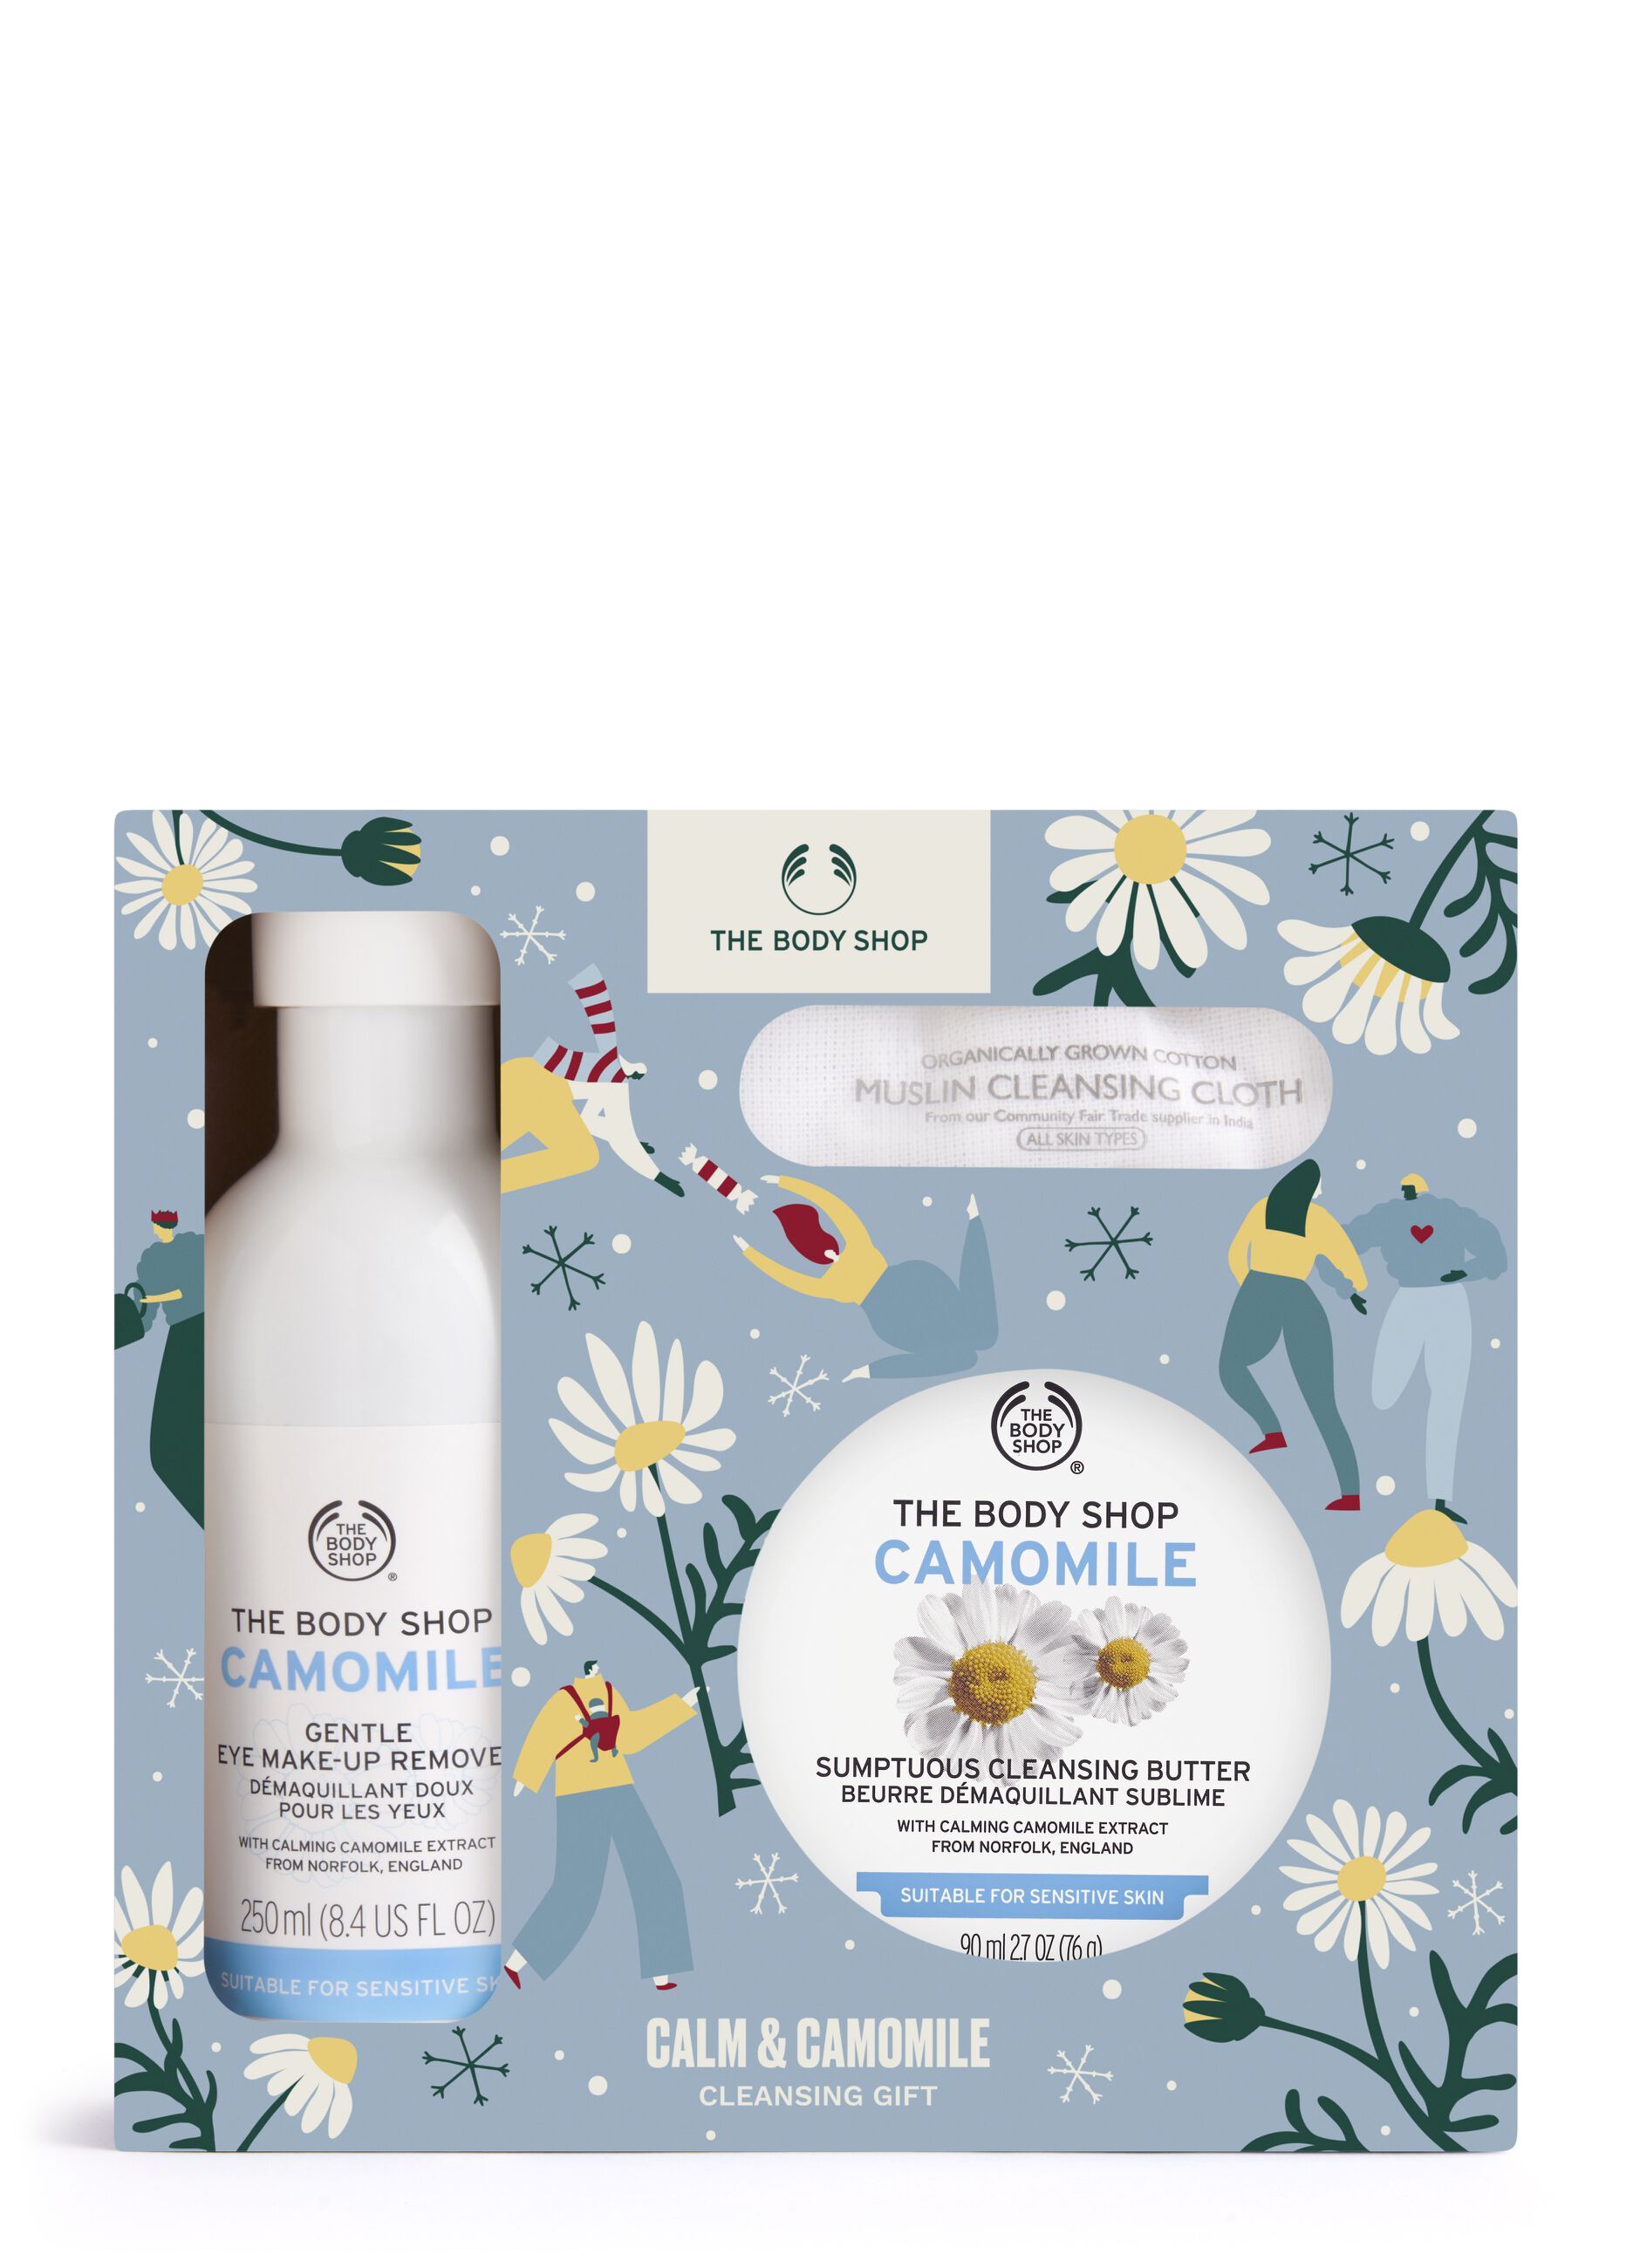 The Body Shop camomile facial cleansing gift box